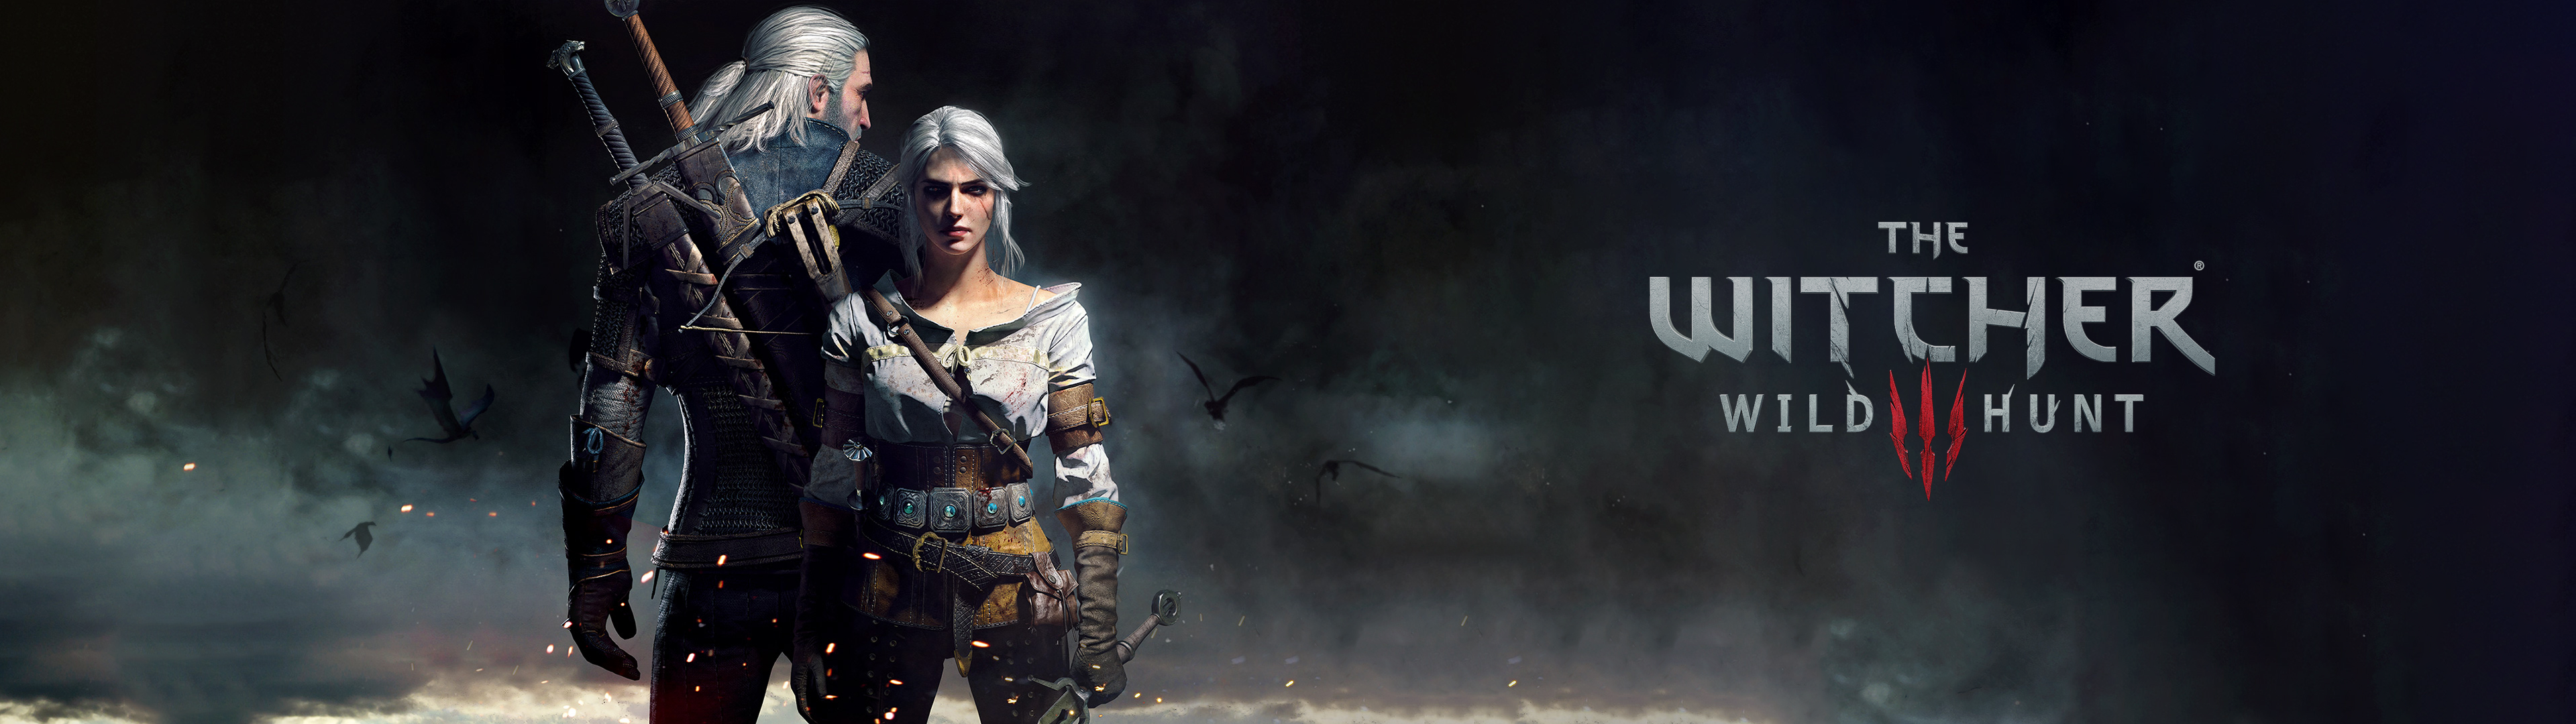 General 3840x1080 The Witcher 3: Wild Hunt video games multiple display RPG PC gaming CD Projekt RED Geralt of Rivia Cirilla Fiona Elen Riannon